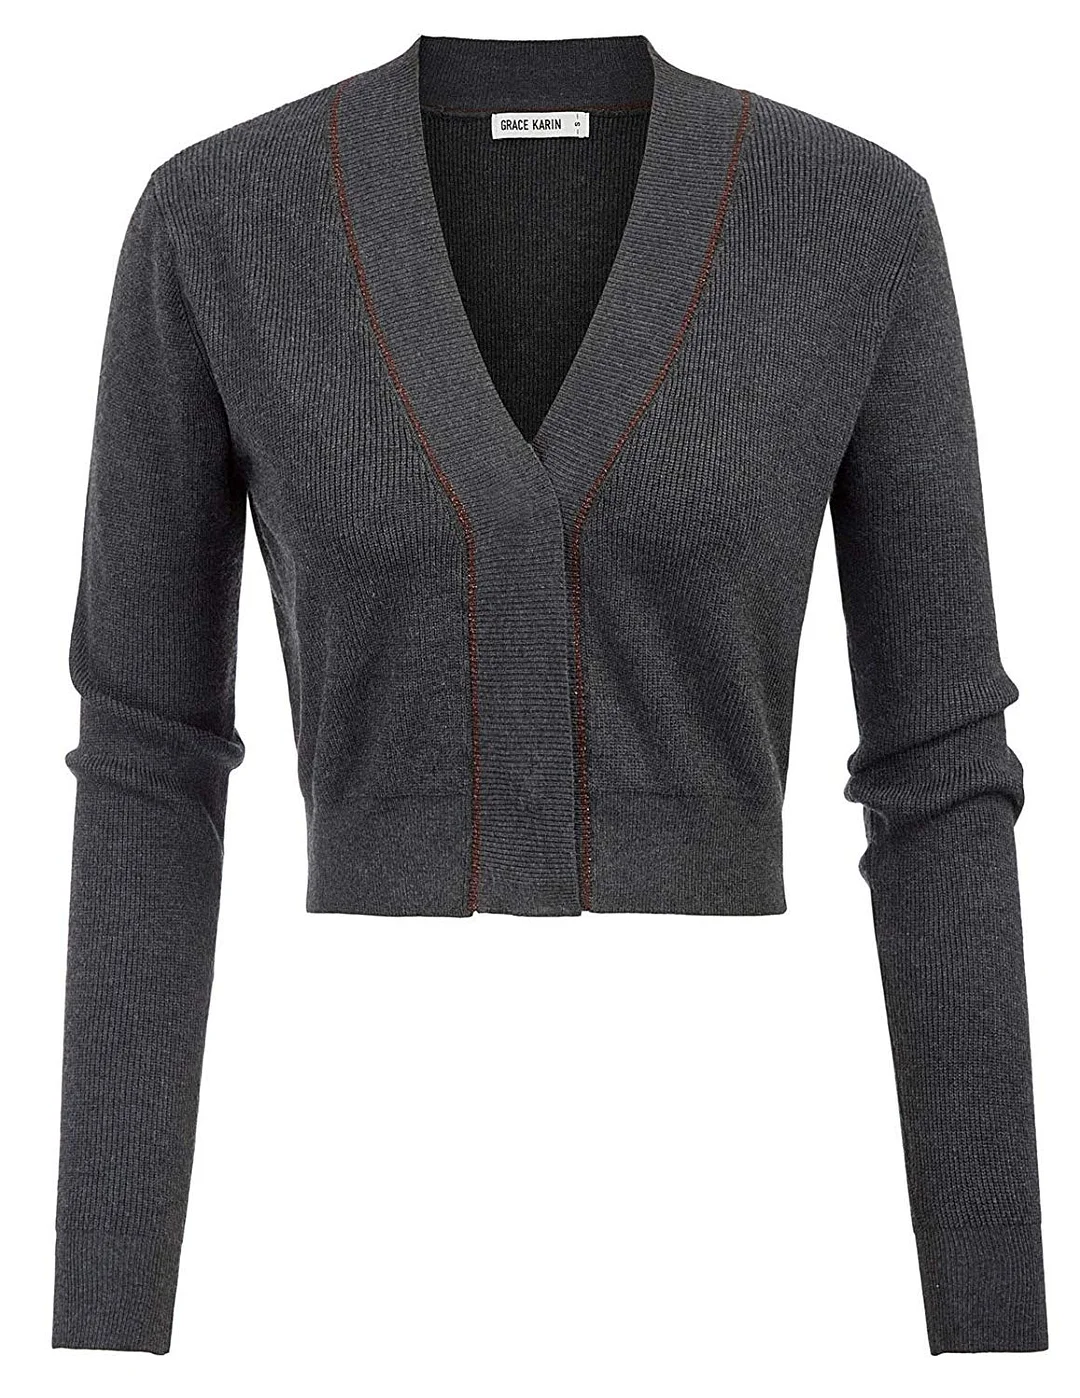 Women's Long Sleeve V-Neck Button Down Stretch Knit Cardigan Sweater